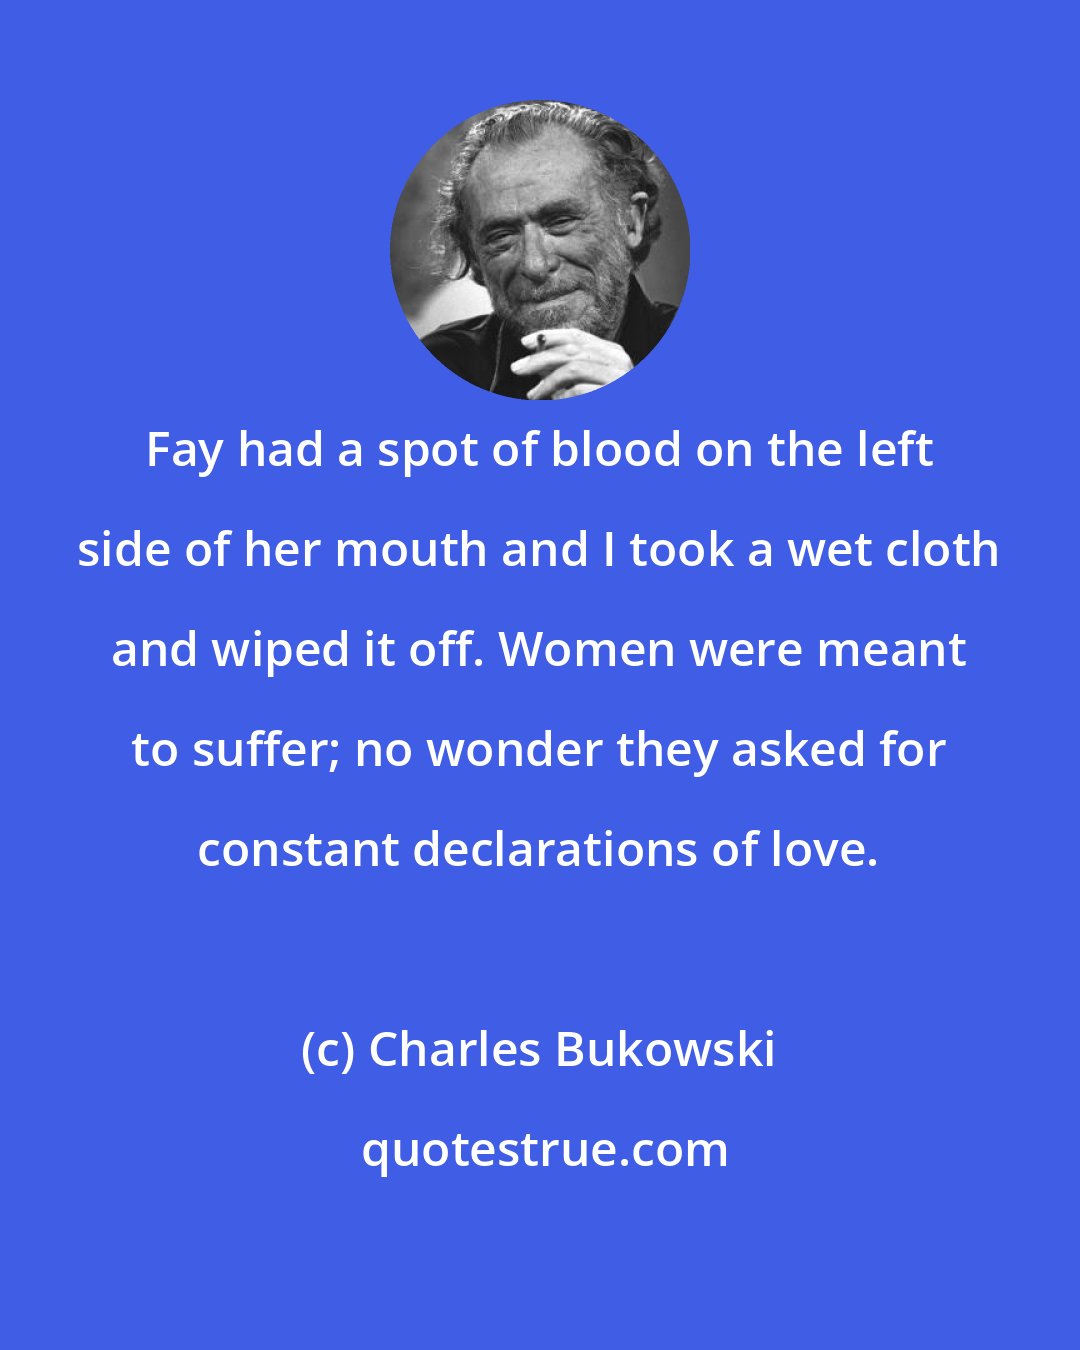 Charles Bukowski: Fay had a spot of blood on the left side of her mouth and I took a wet cloth and wiped it off. Women were meant to suffer; no wonder they asked for constant declarations of love.